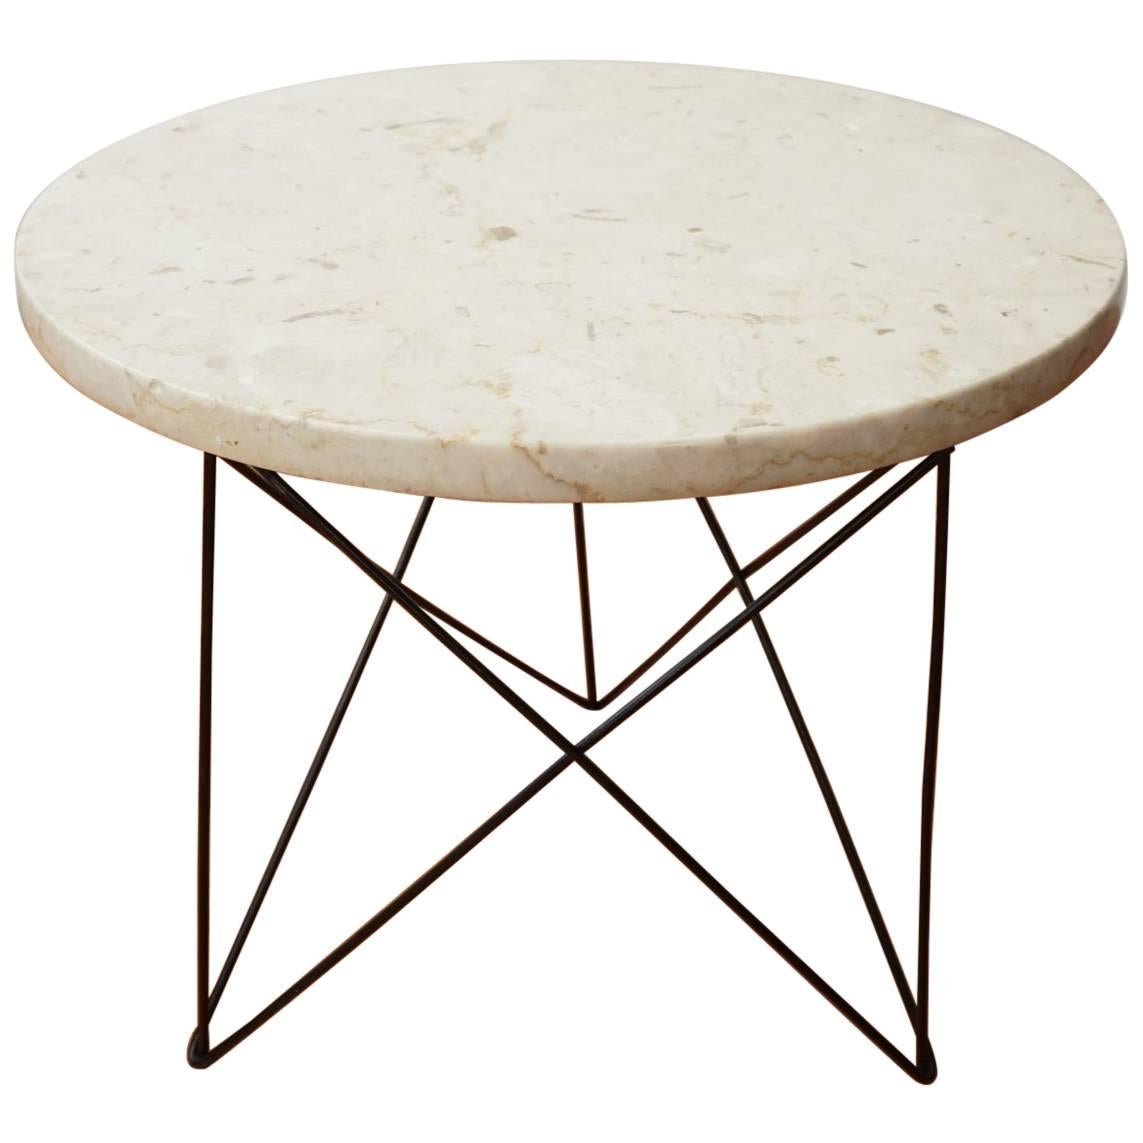 Martin Perfit for Rene Brancusi Marble Top Occasional Table with Strut Base